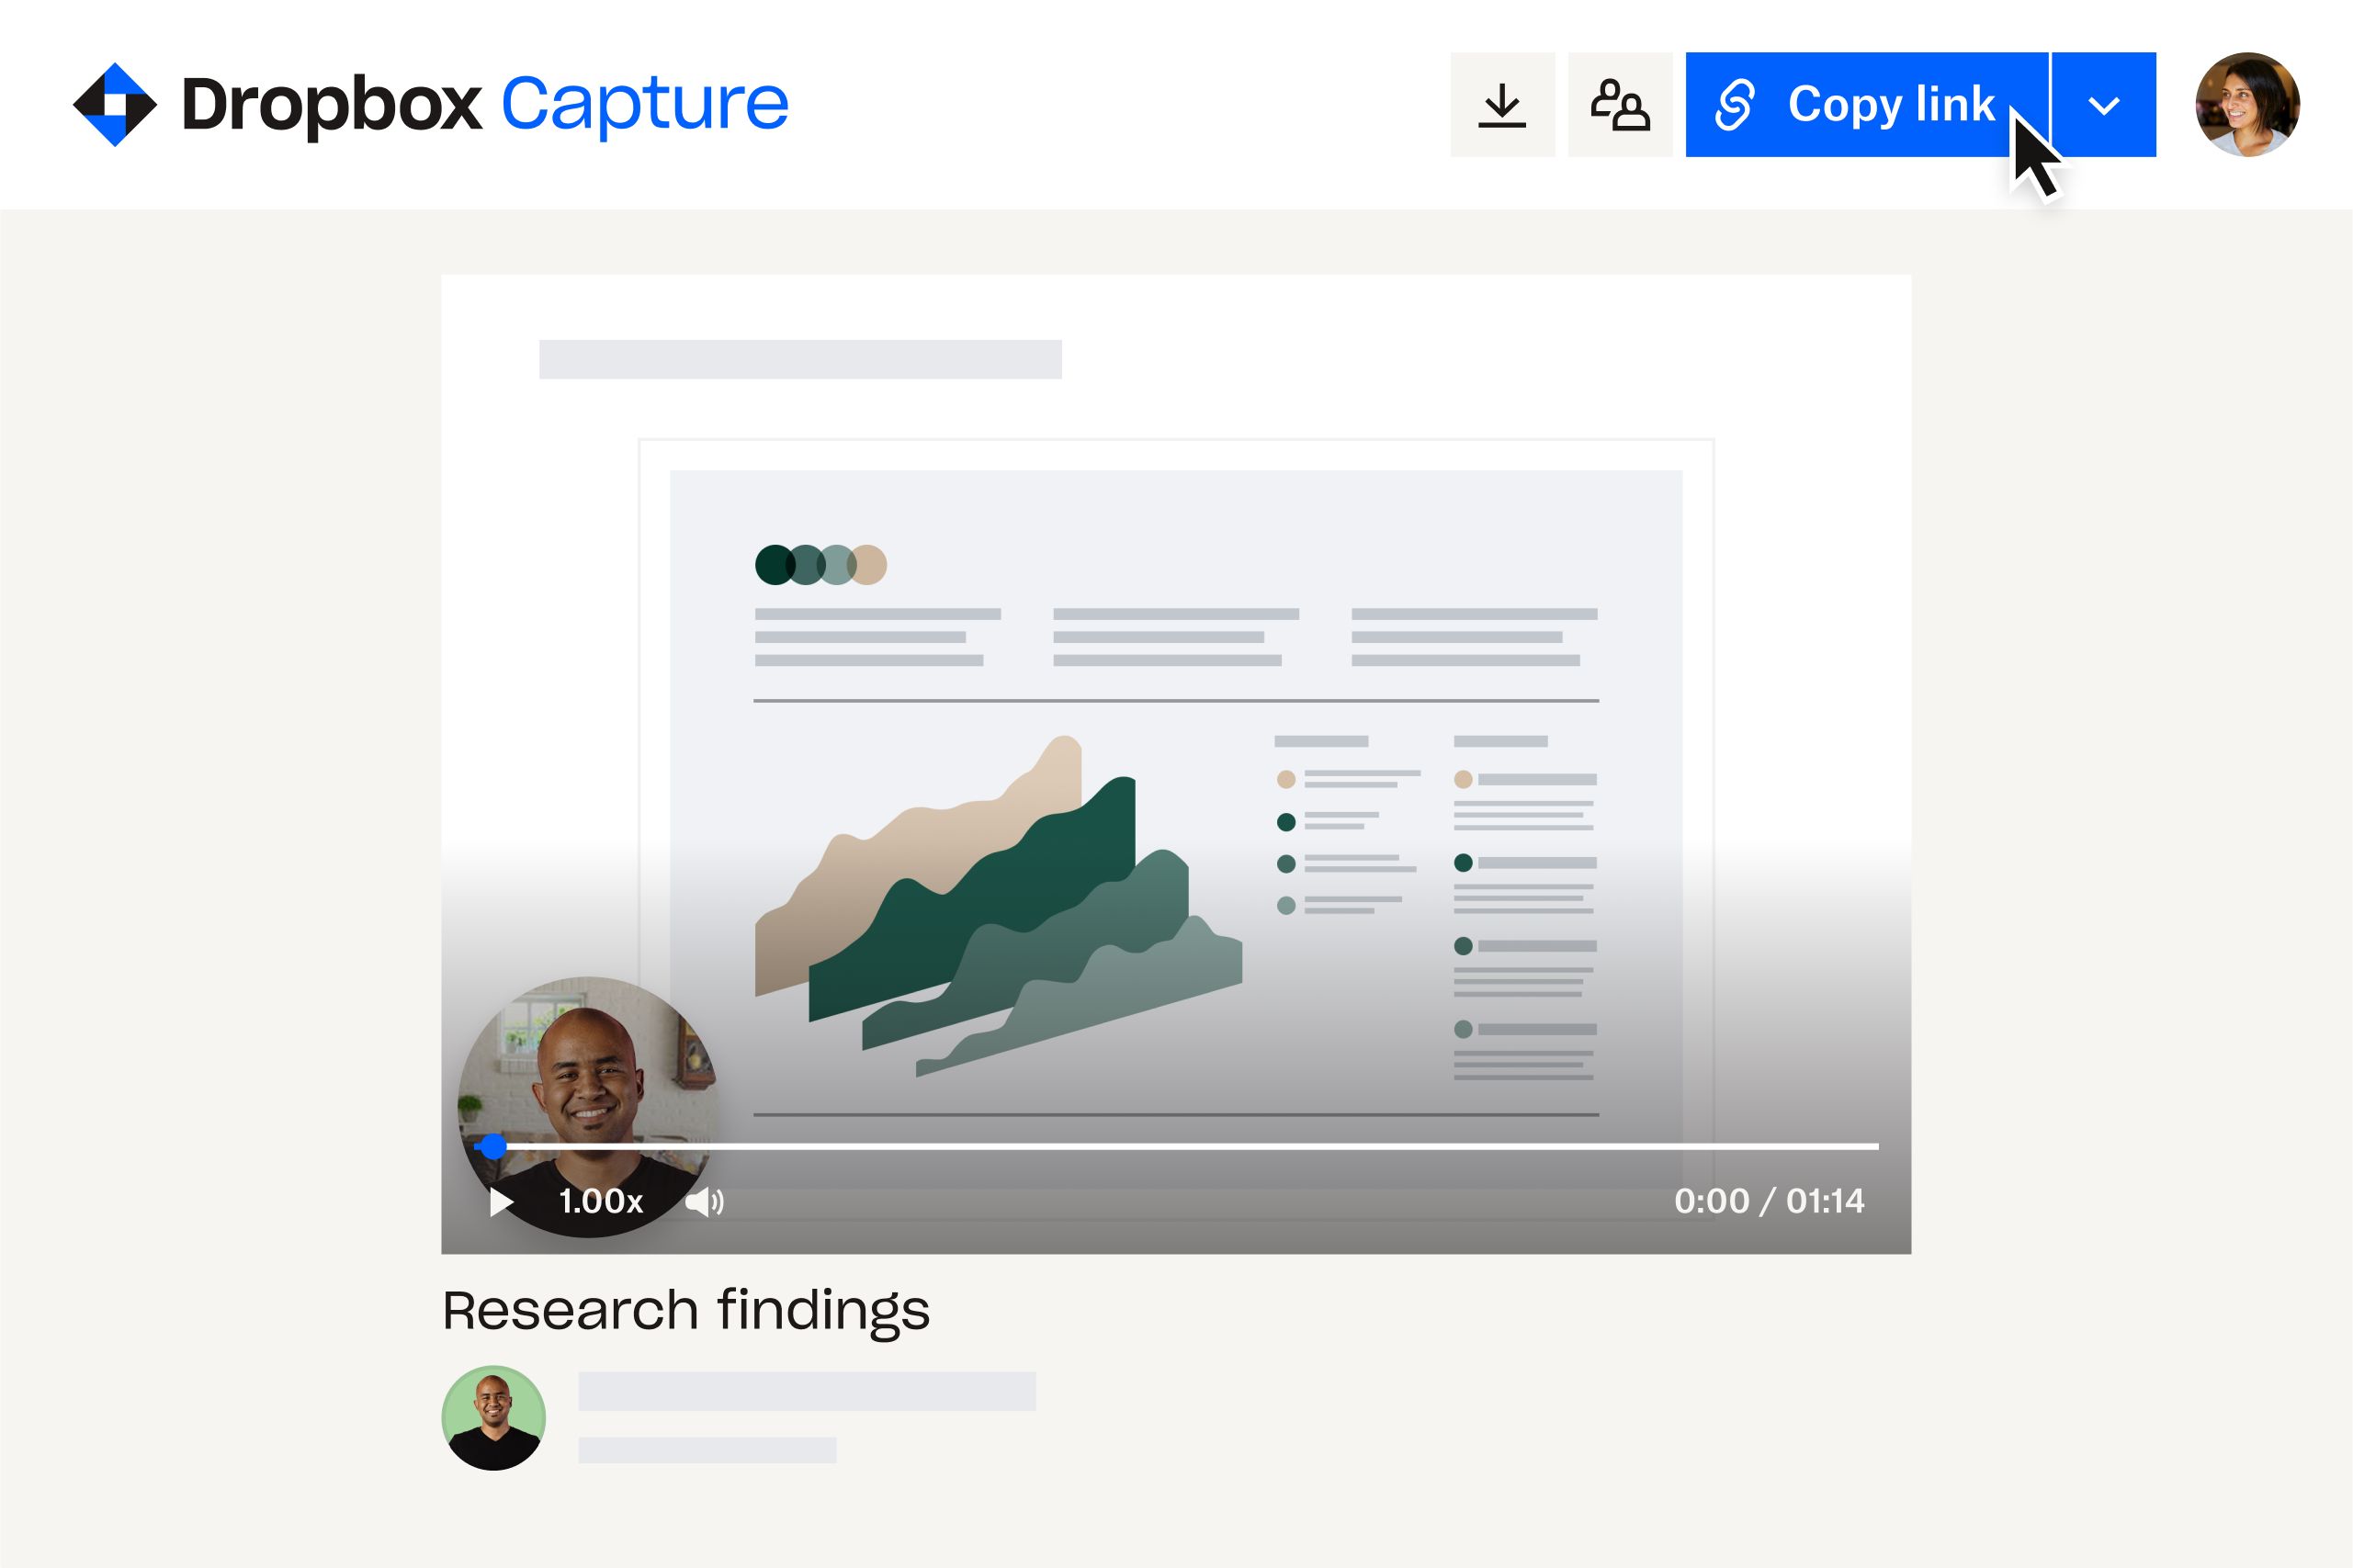 A visual representation of the Dropbox Capture interface, demonstrating how to share your screen recording with a link.